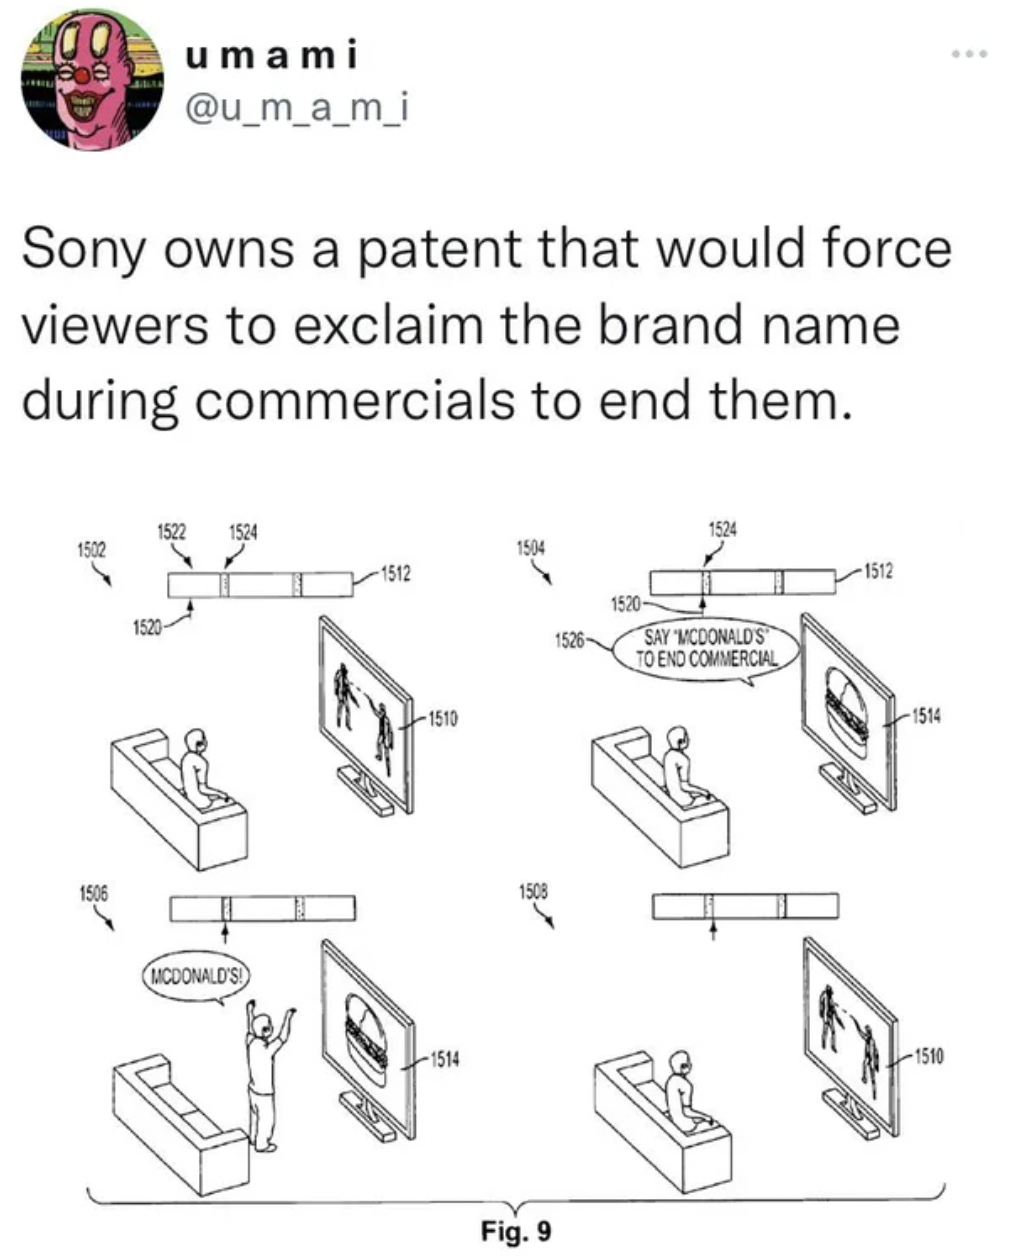 Facepalms and Fails - sony tv ad patent - umami Sony owns a patent that would force viewers to exclaim the brand name during commercials to end them.